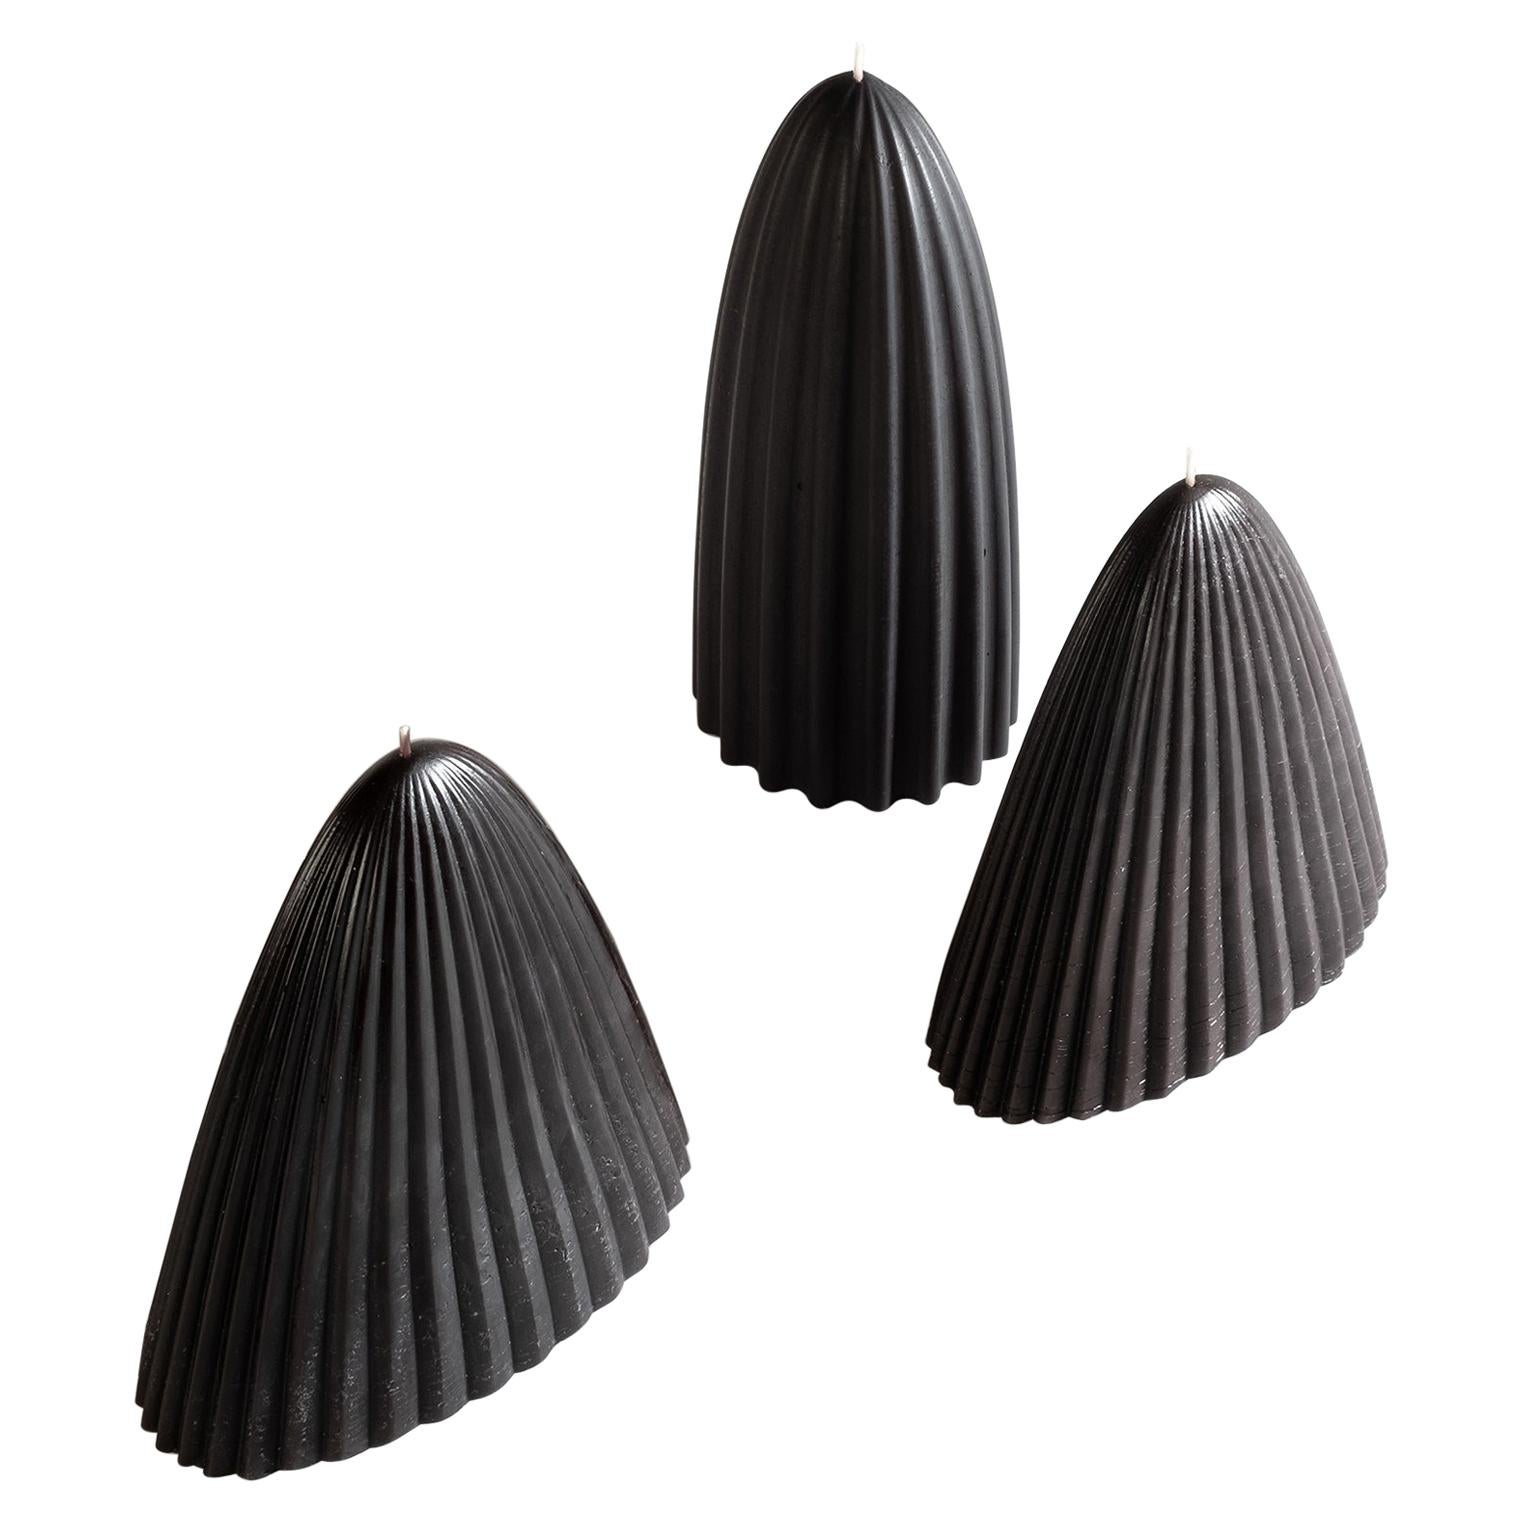 Tusk Candle, Set of Two, Black Beeswax